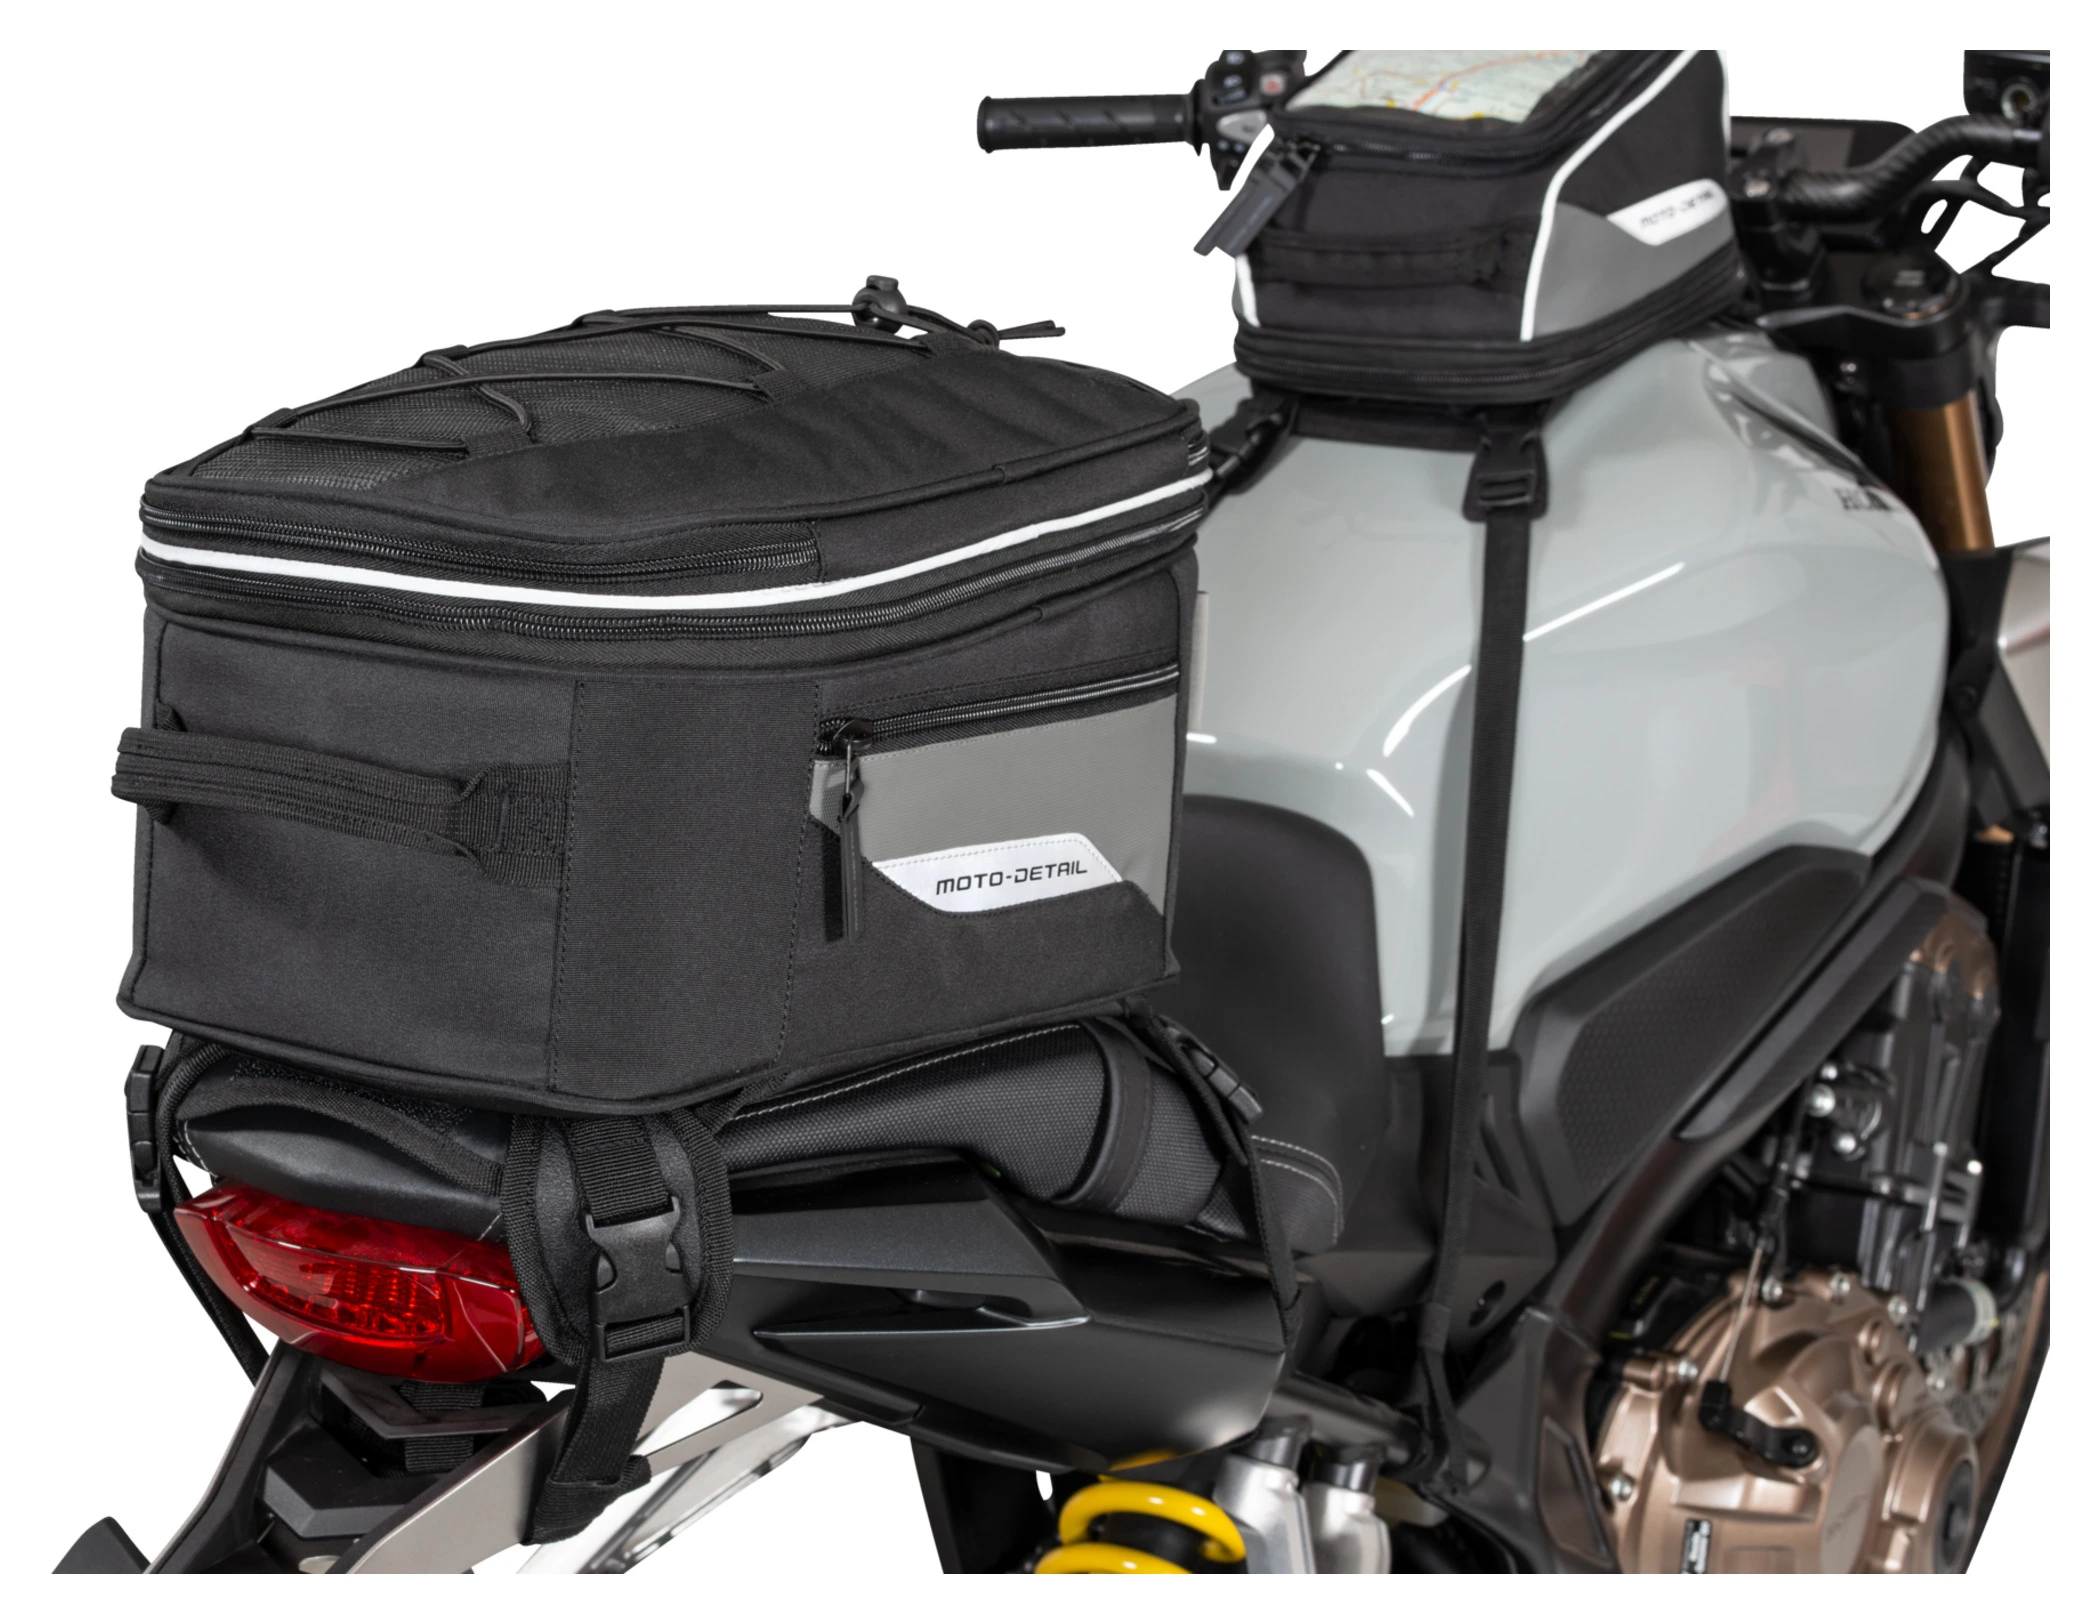 Motorcycle Top Case Box Scooter Luggage Matt Black 35L Universal Fit Touring